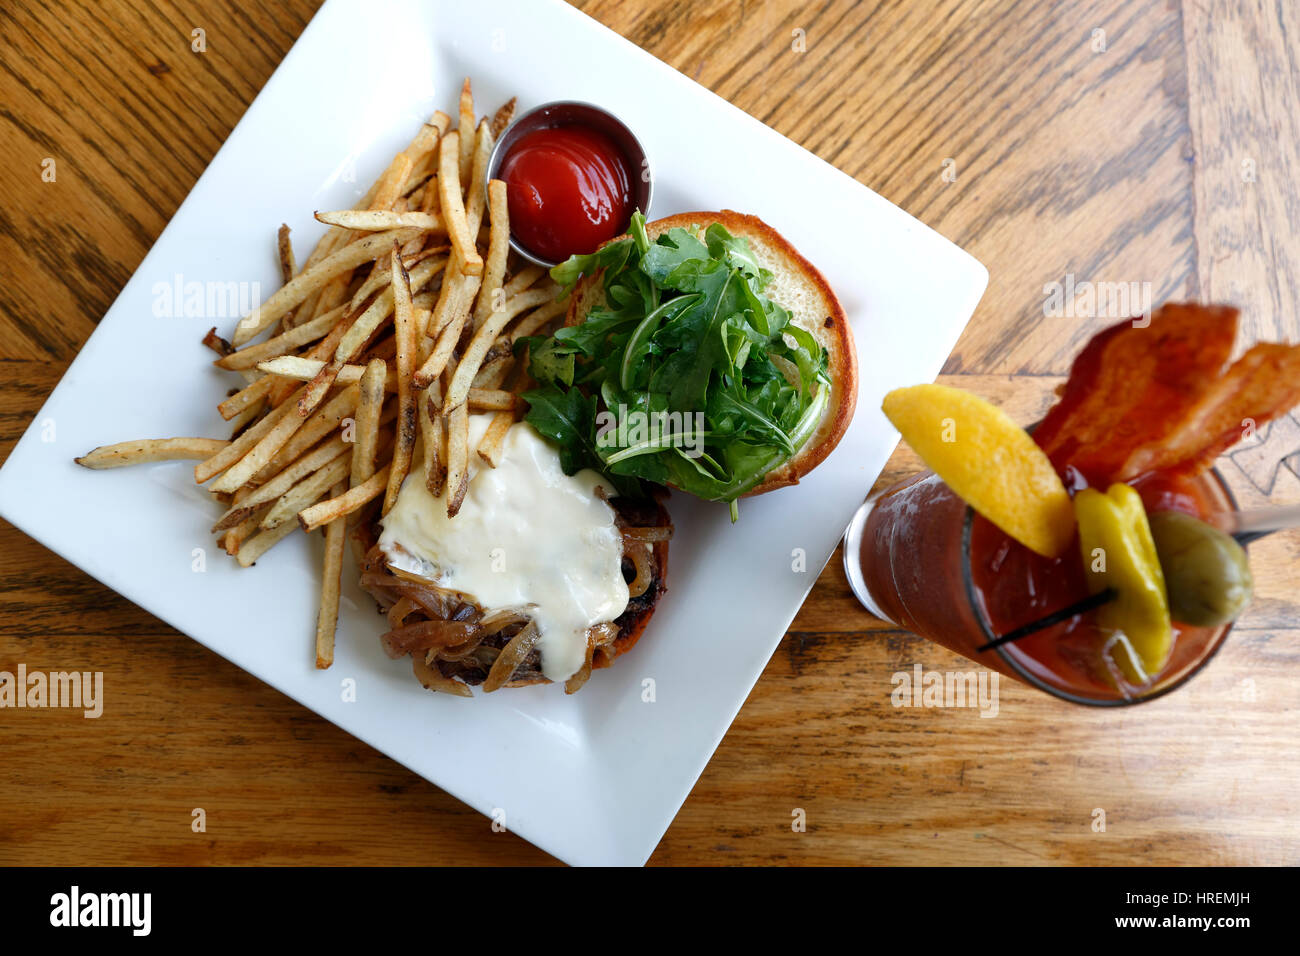 Bison Bistro Burger and fries with Bacon Bloody Mary, Dining Hall, Chautauqua Park, Boulder, Colorado USA Stock Photo